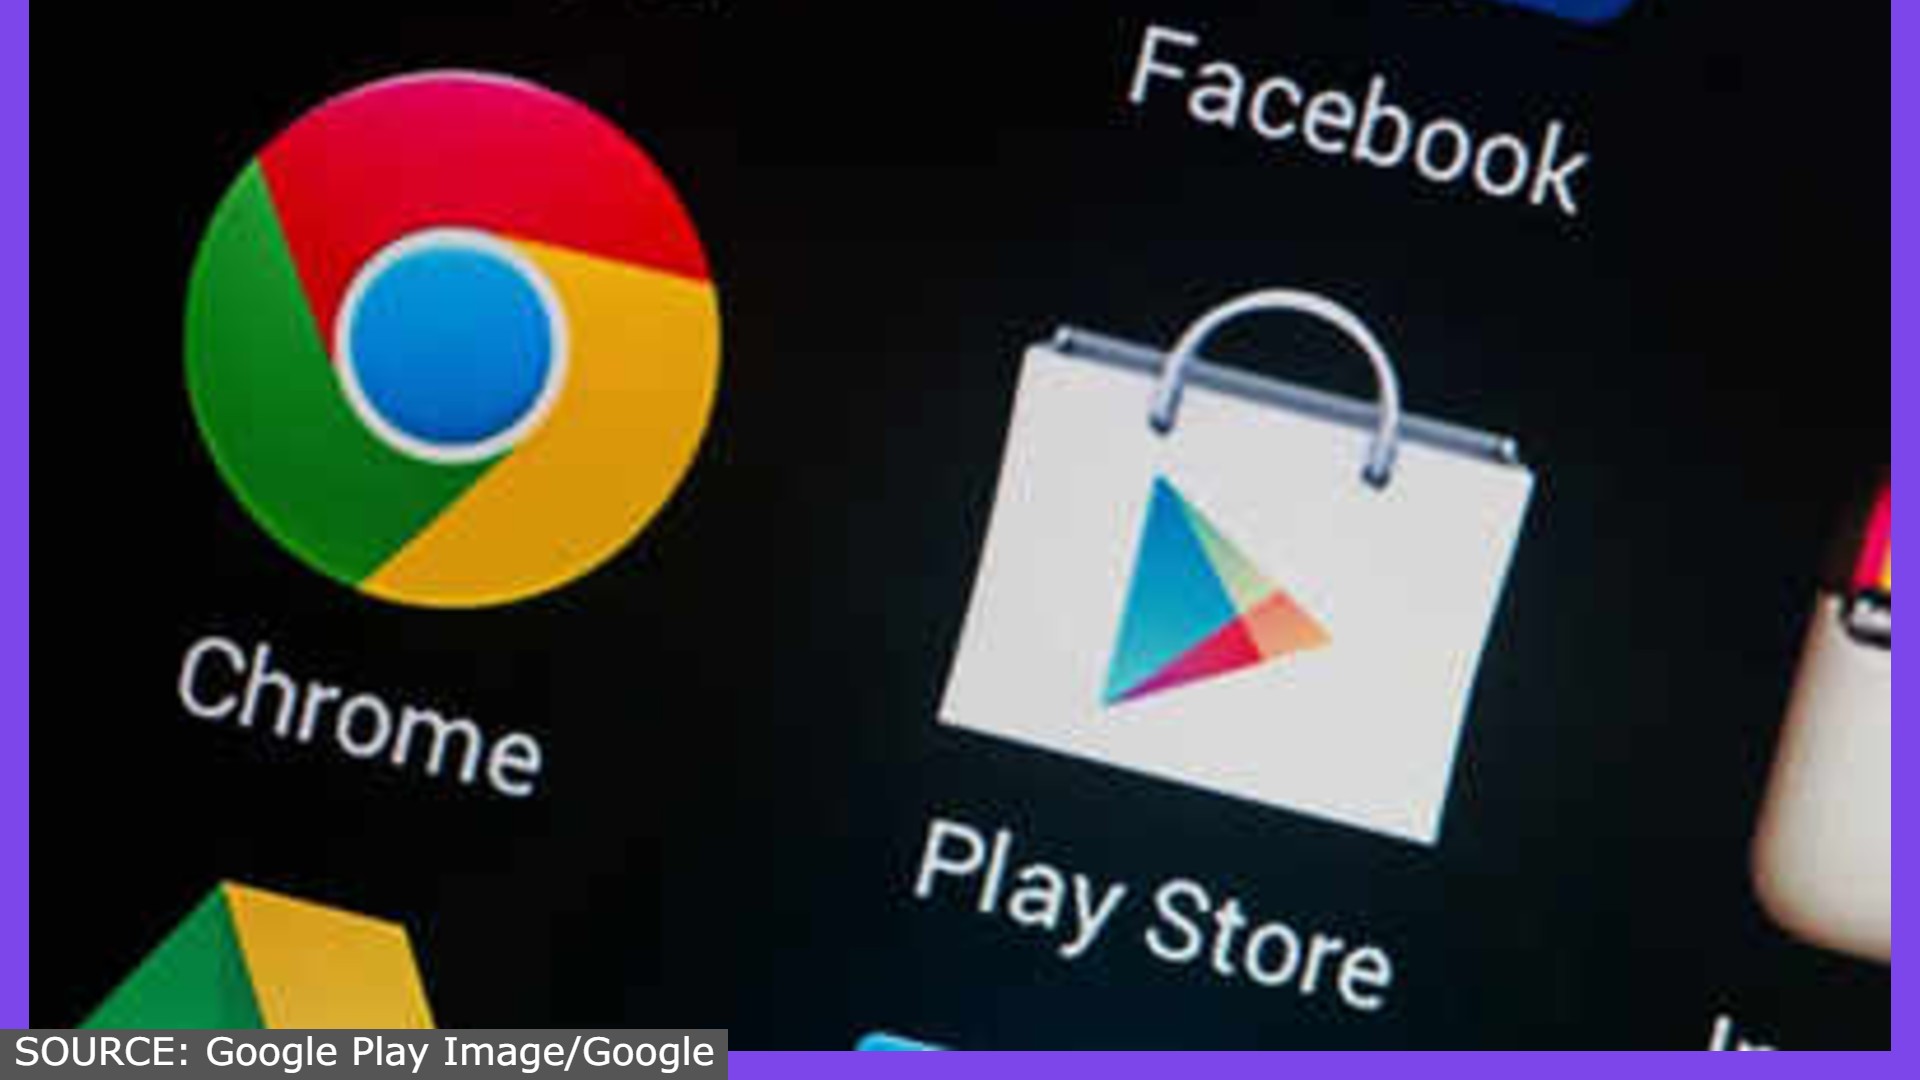 Read more about the article Google Play Gift Card Codes Unused<span class="rmp-archive-results-widget "><i class=" rmp-icon rmp-icon--ratings rmp-icon--star rmp-icon--full-highlight"></i><i class=" rmp-icon rmp-icon--ratings rmp-icon--star rmp-icon--full-highlight"></i><i class=" rmp-icon rmp-icon--ratings rmp-icon--star rmp-icon--full-highlight"></i><i class=" rmp-icon rmp-icon--ratings rmp-icon--star rmp-icon--full-highlight"></i><i class=" rmp-icon rmp-icon--ratings rmp-icon--star rmp-icon--full-highlight"></i> <span>5 (82)</span></span>